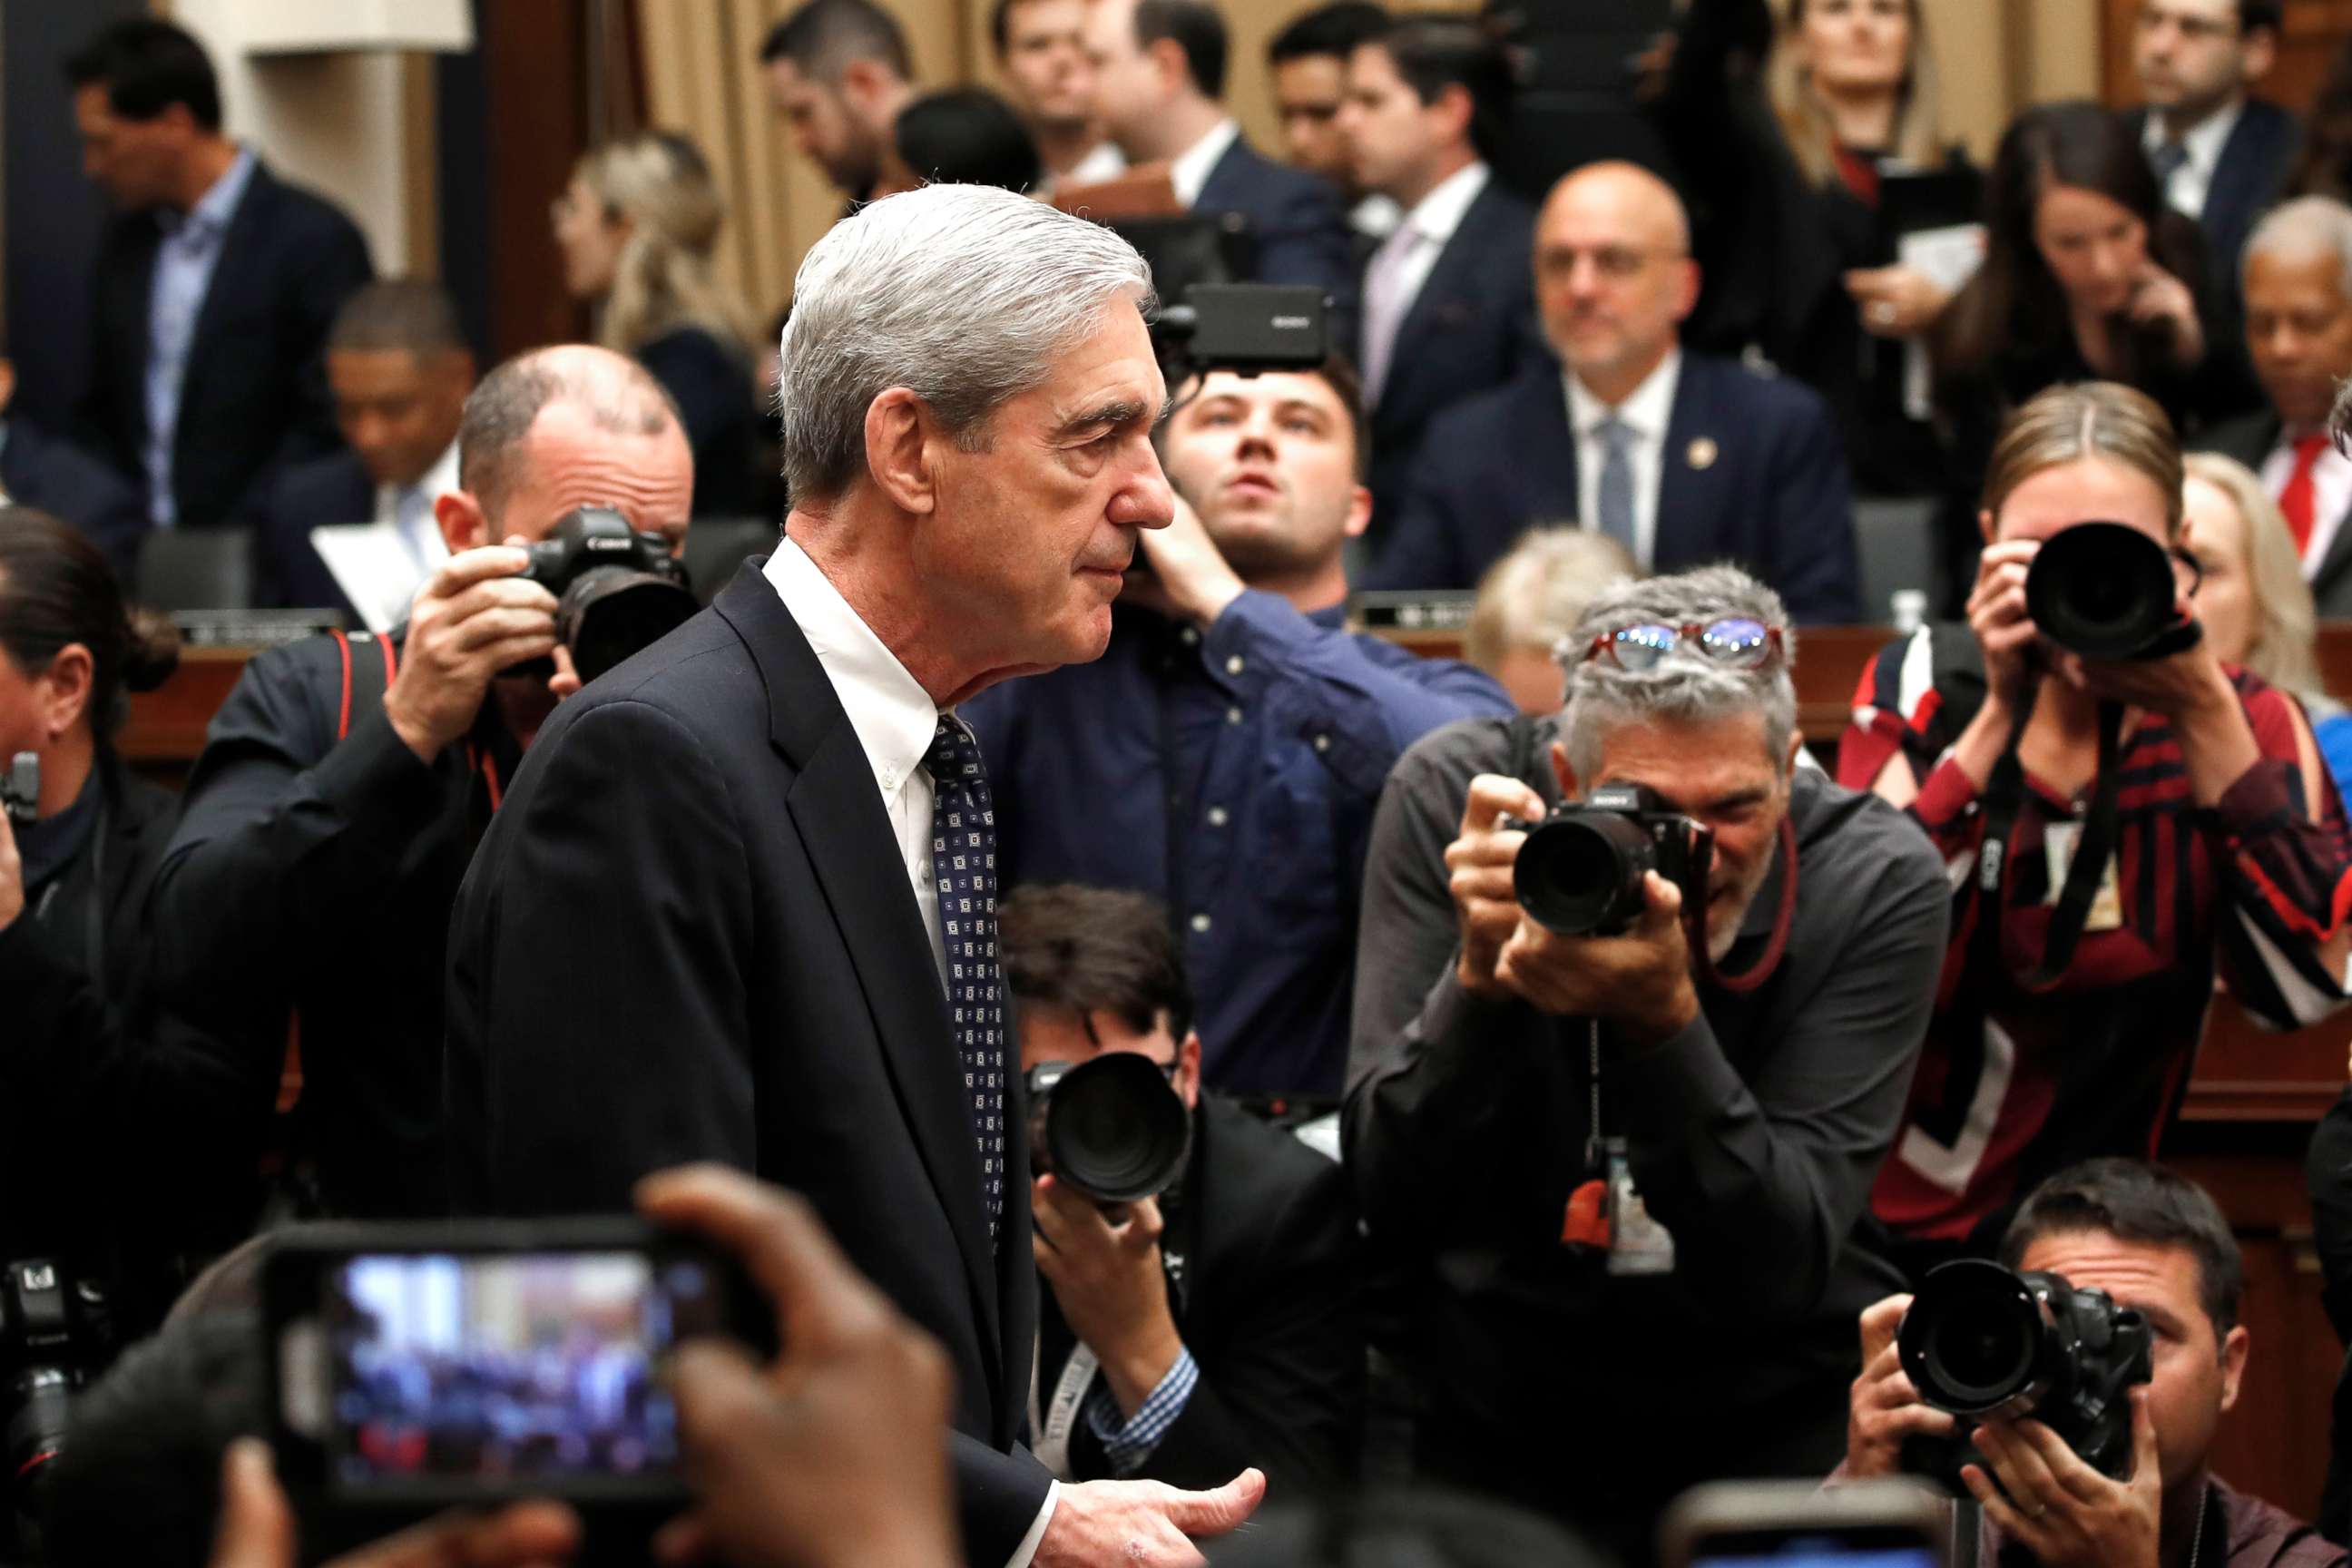 PHOTO: Former special counsel Robert Mueller arrives to testify before the House Judiciary Committee hearing on his report on Russian election interference, on Capitol Hill, July 24, 2019 in Washington.